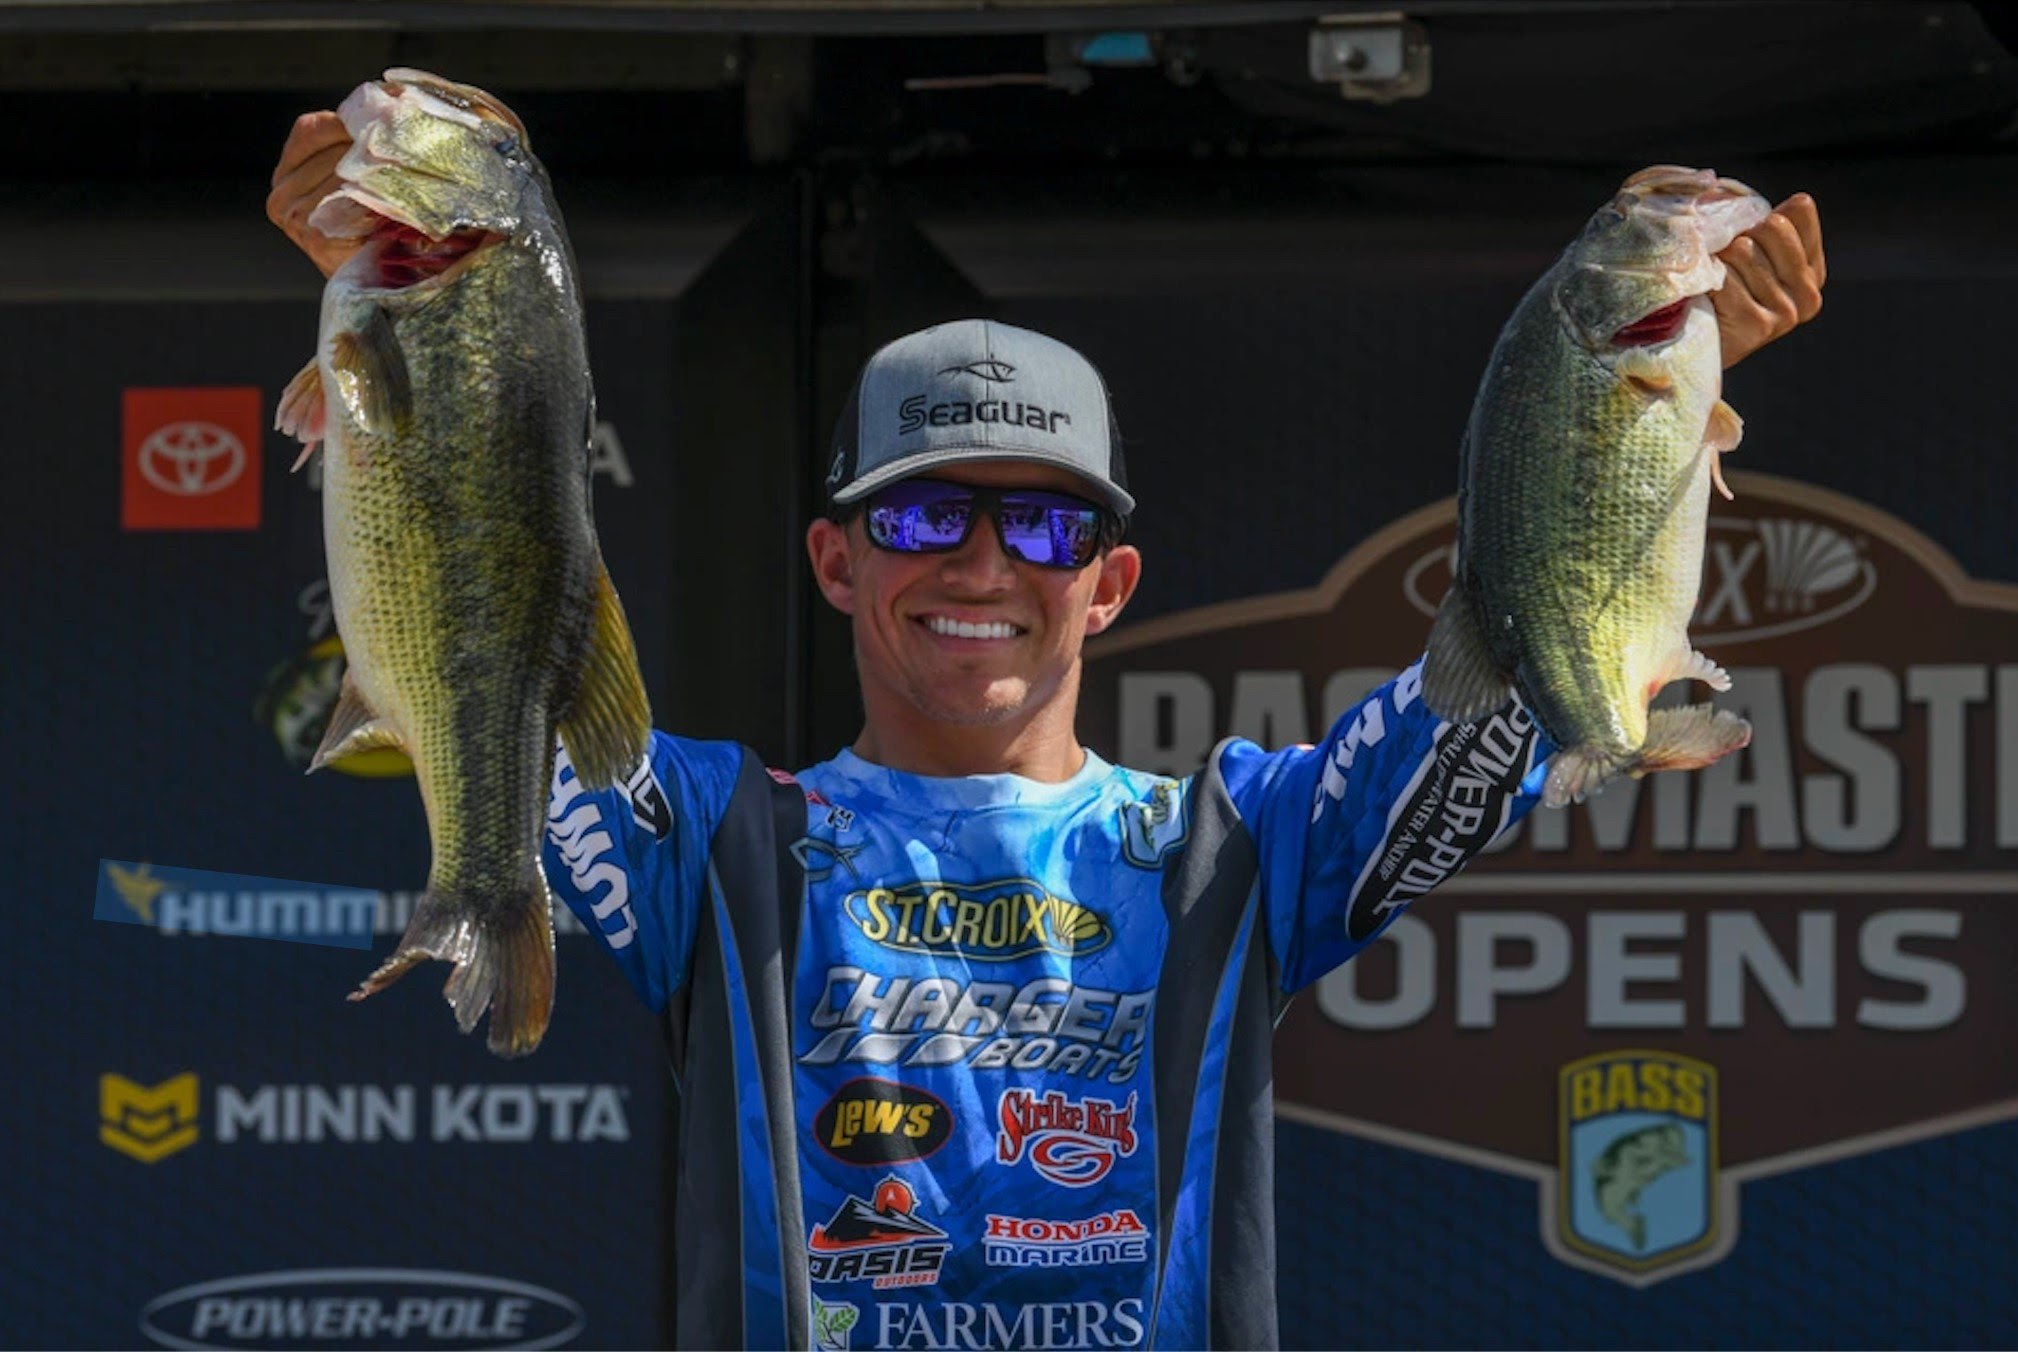 D.K. on X: Everyone who's asked about my Purdue Bass Fishing Club